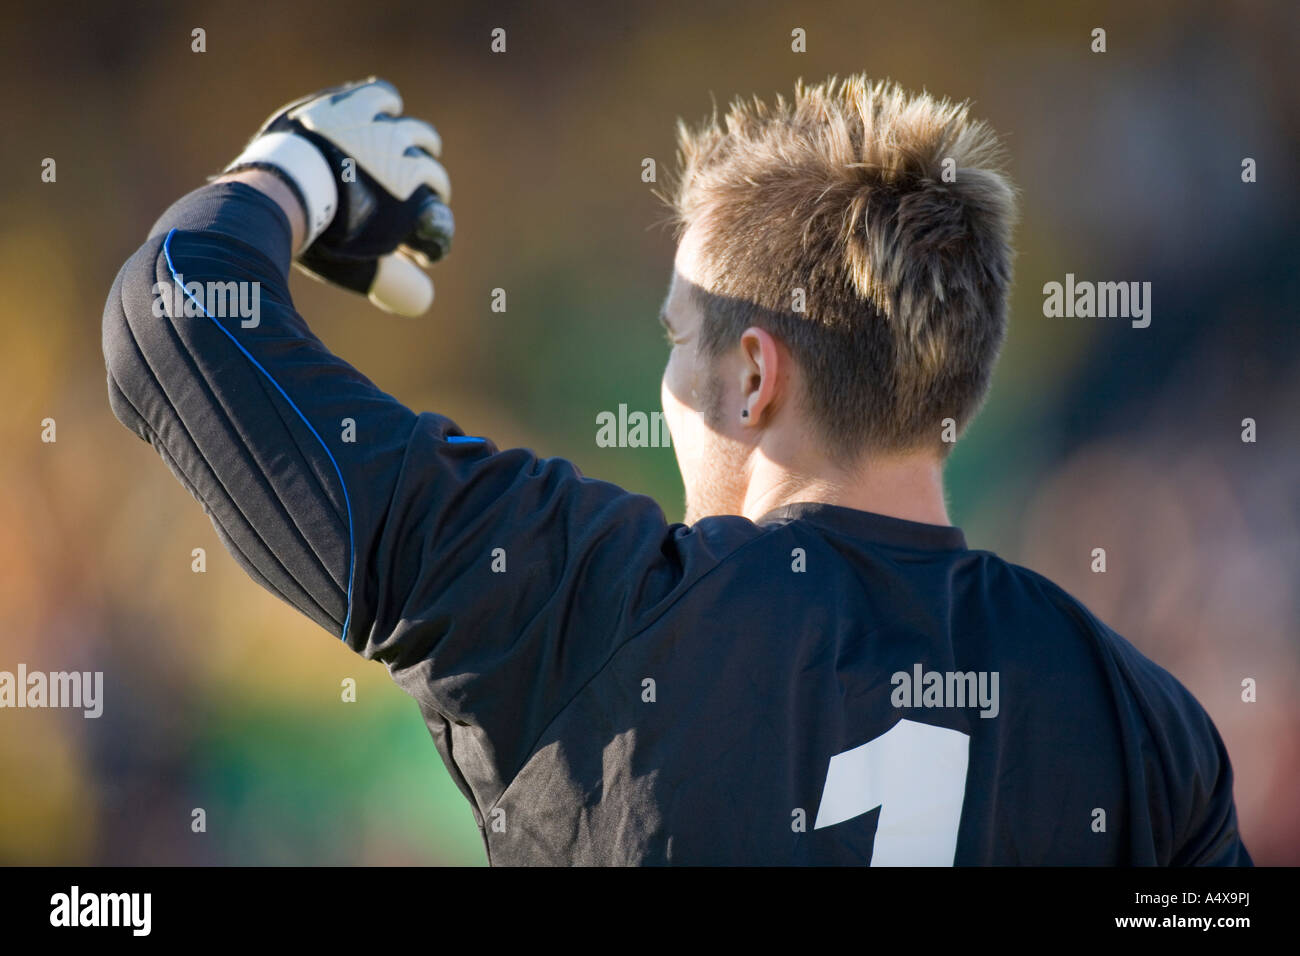 Goalkeeper blinded by the sun Stock Photo